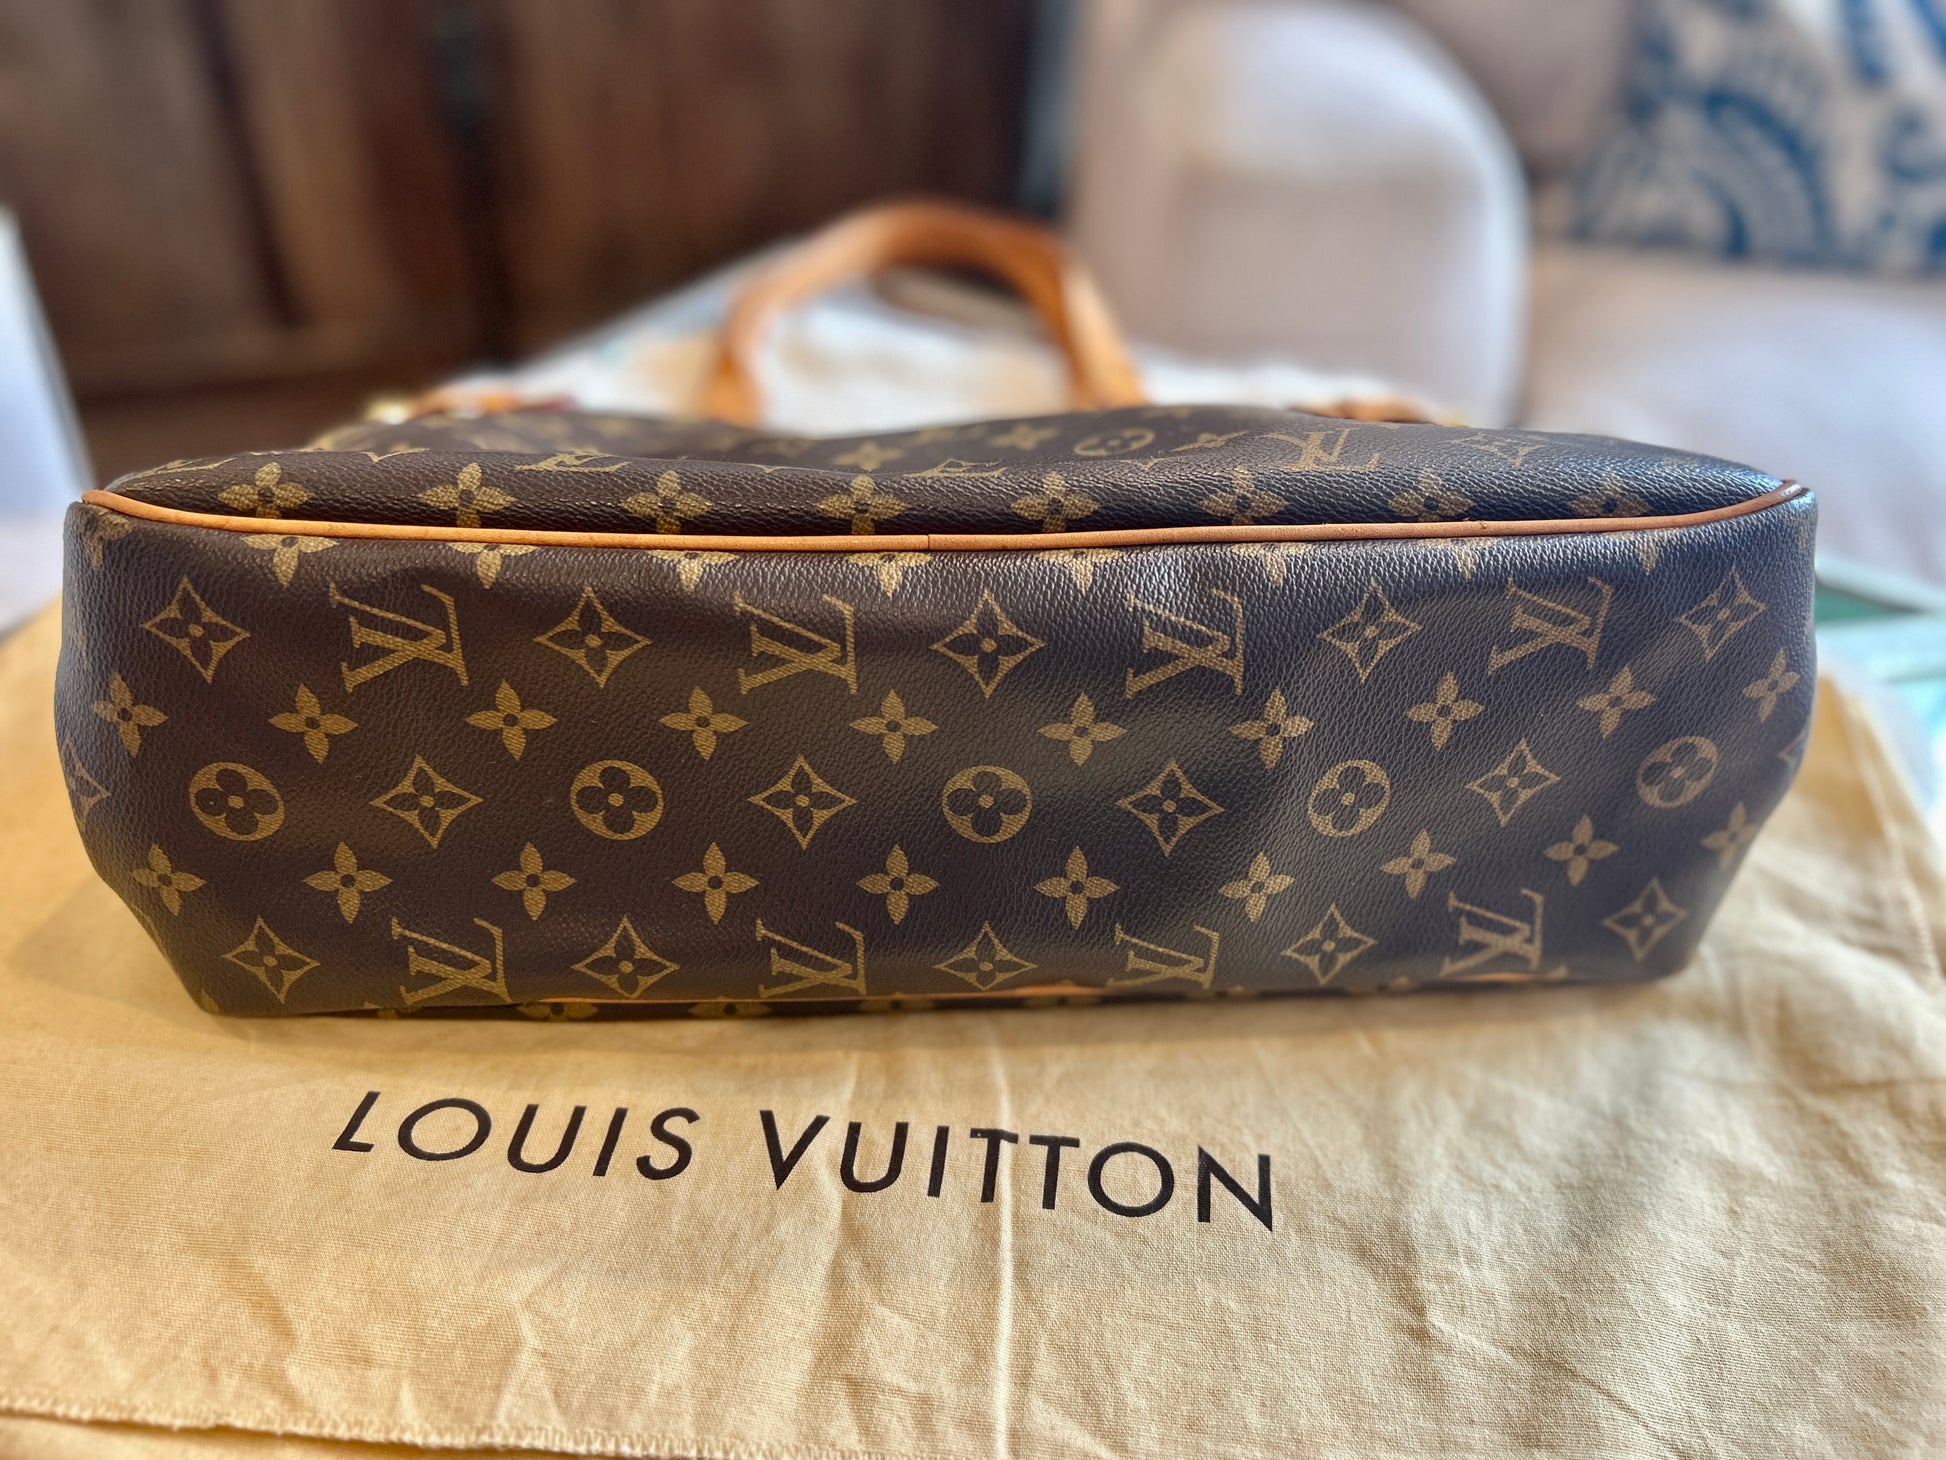 Louis Vuitton Neverfull Bags for sale in Lois, Virginia, Facebook  Marketplace